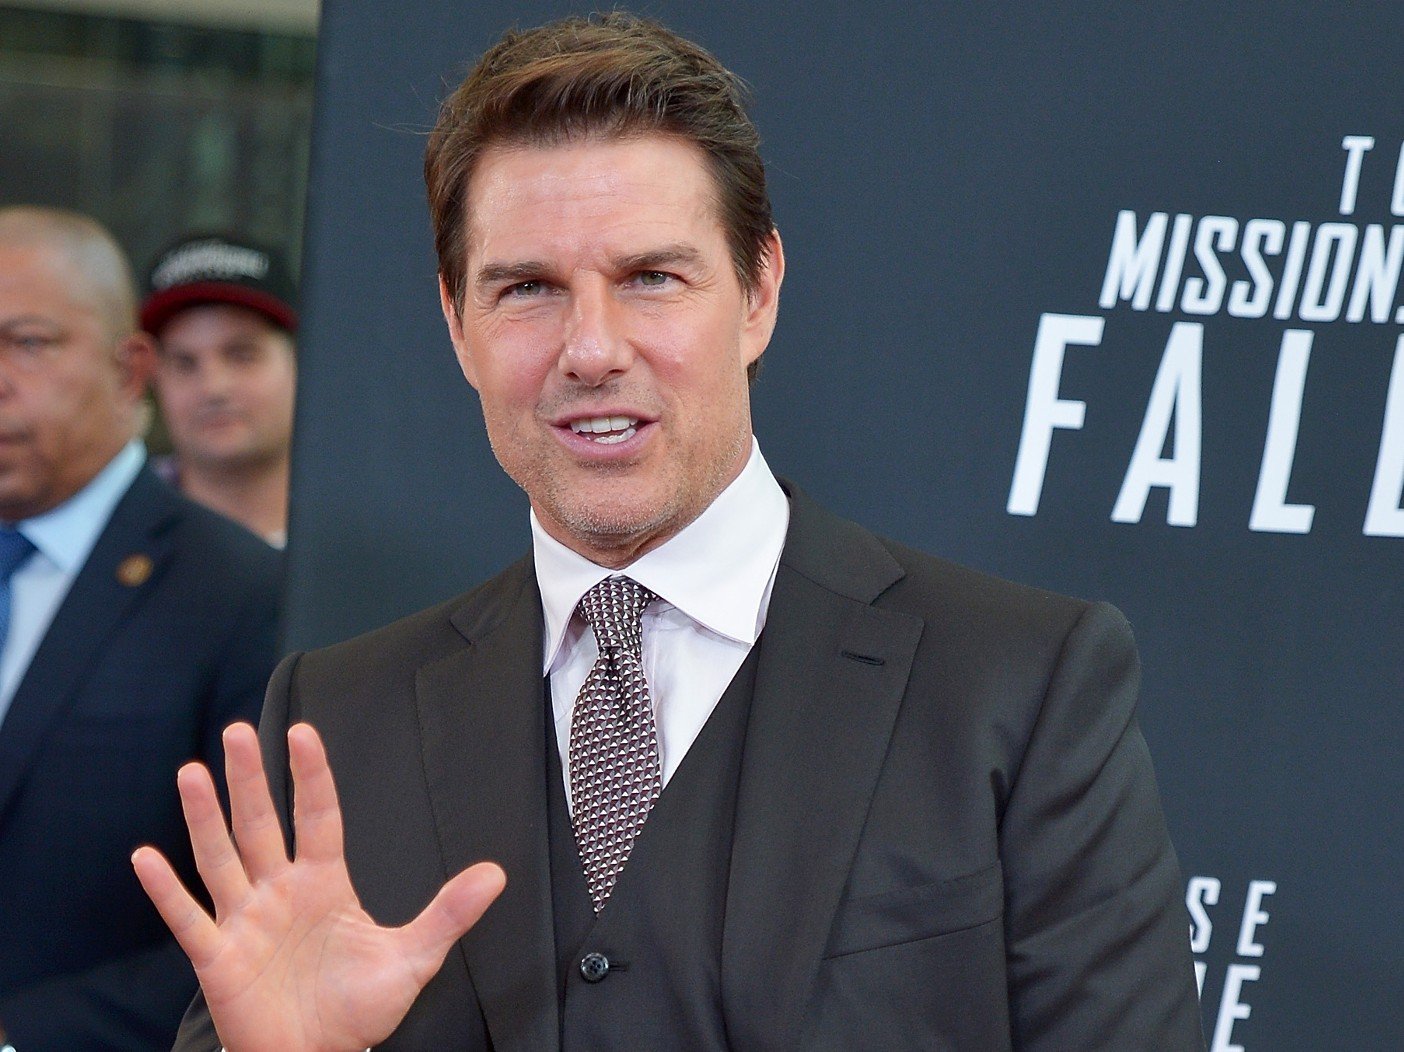 Tom Cruise Allegedly Rejected By A-List Actress He Tried To Date, Anonymous Insider Claims